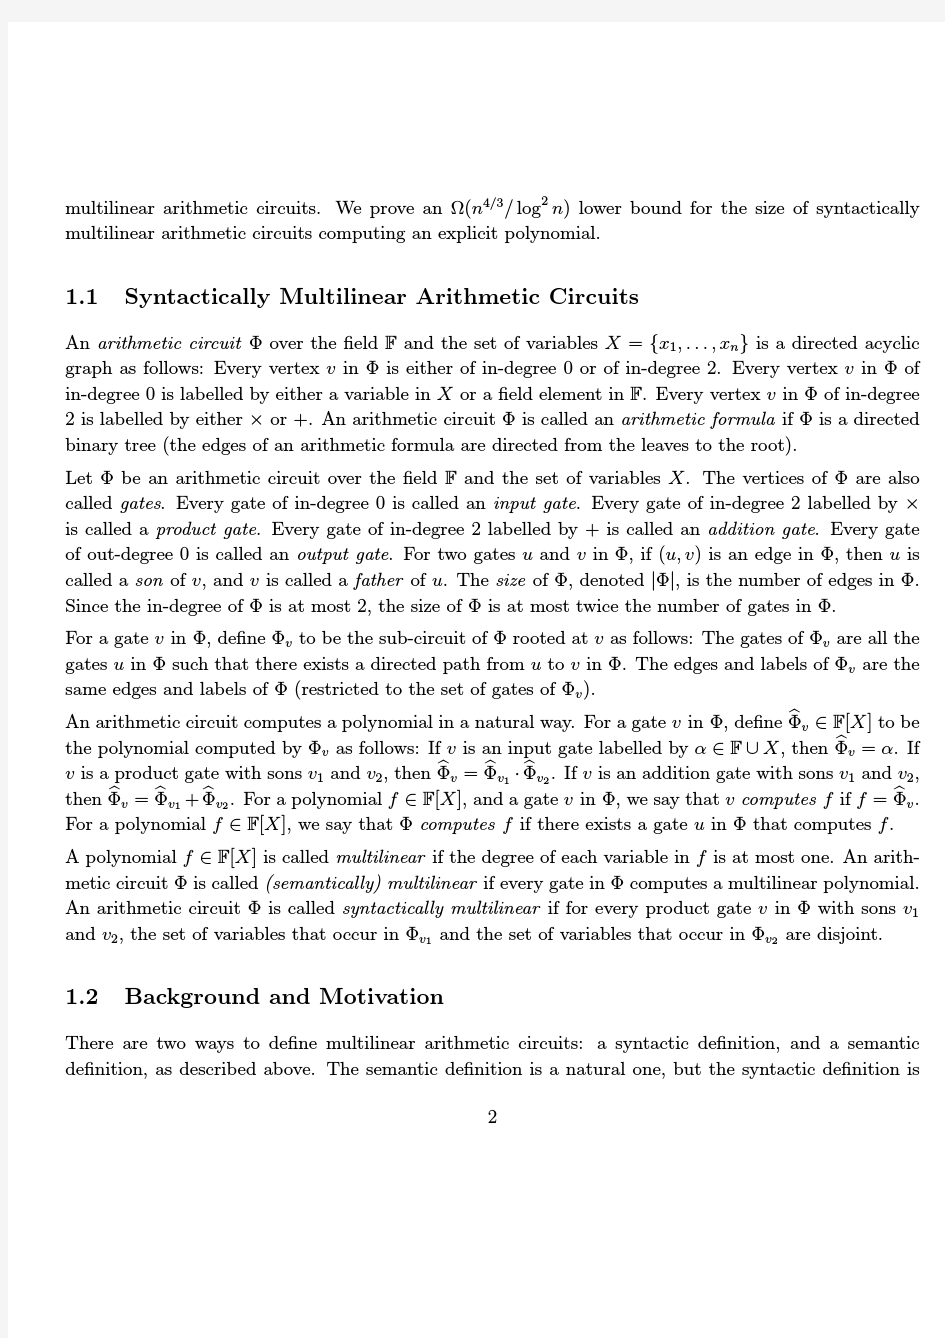 A Lower Bound for the Size of Syntactically Multilinear Arithmetic Circuits